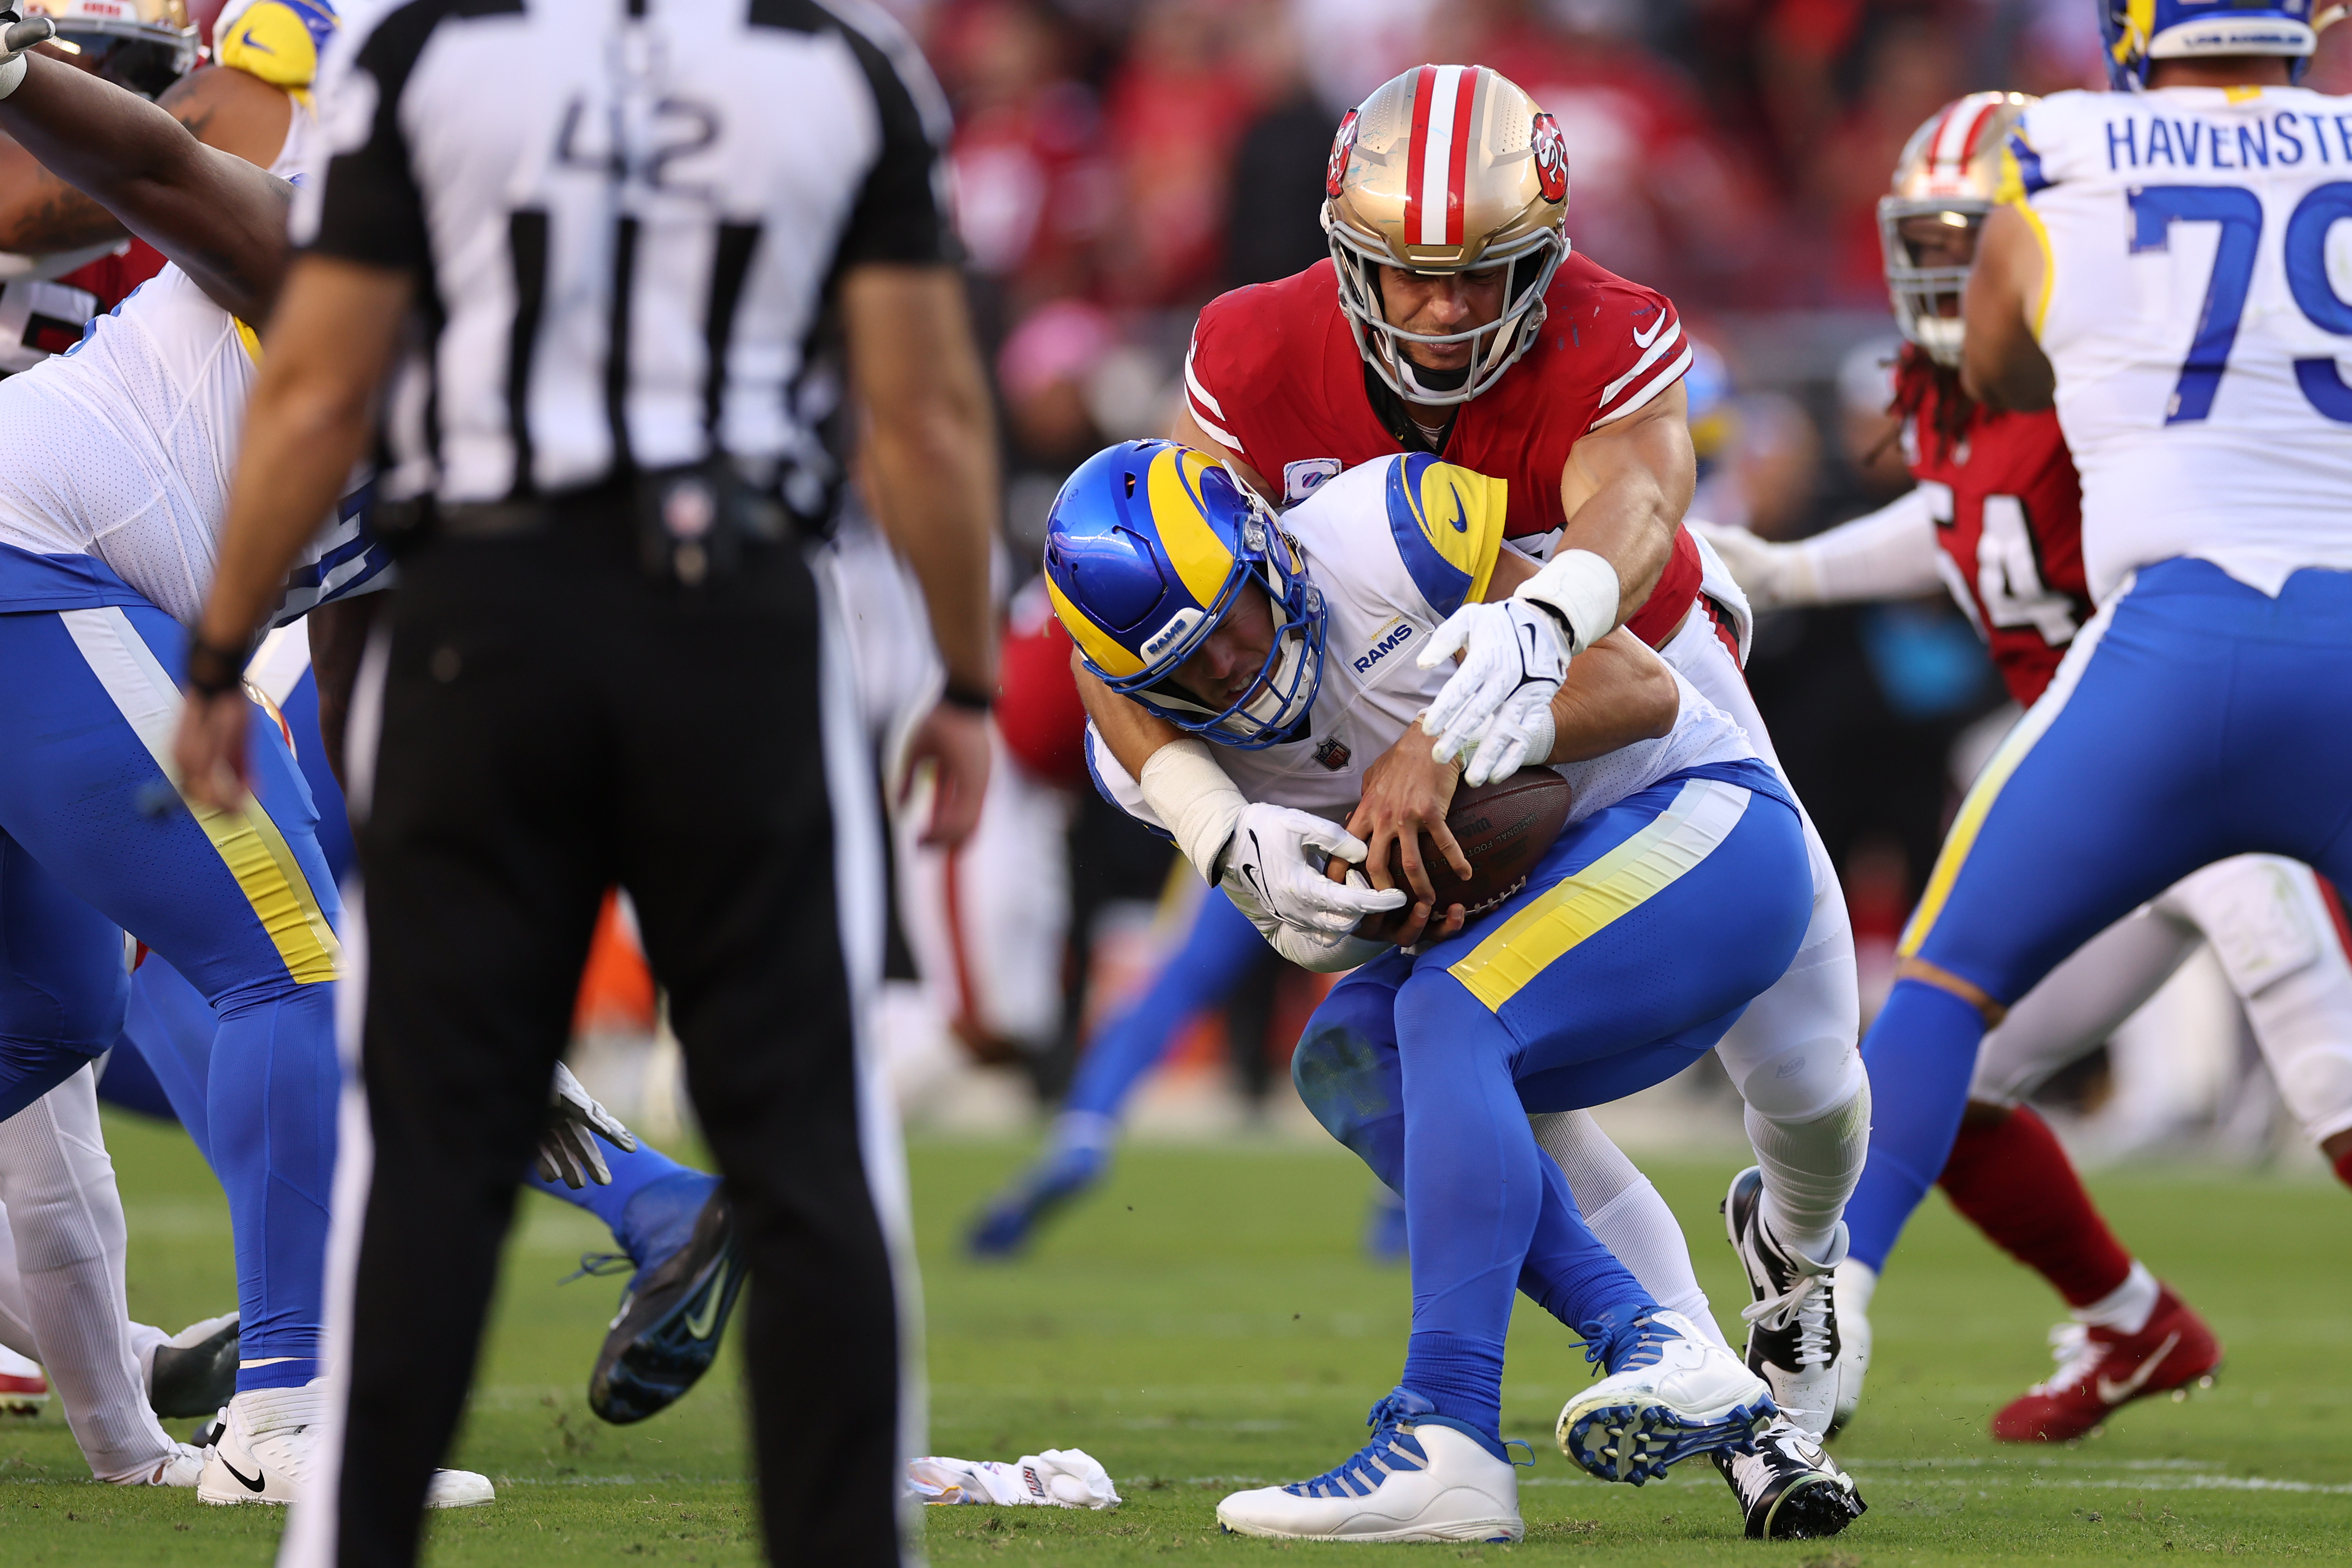 Quarterback Matthew Stafford (C) of the Los Angeles Rams is sacked by defensive end Nick Bosa of the San Francisco 49ers in the game at Levi's Stadium in Santa Clara, California, October 3, 2022. /CFP